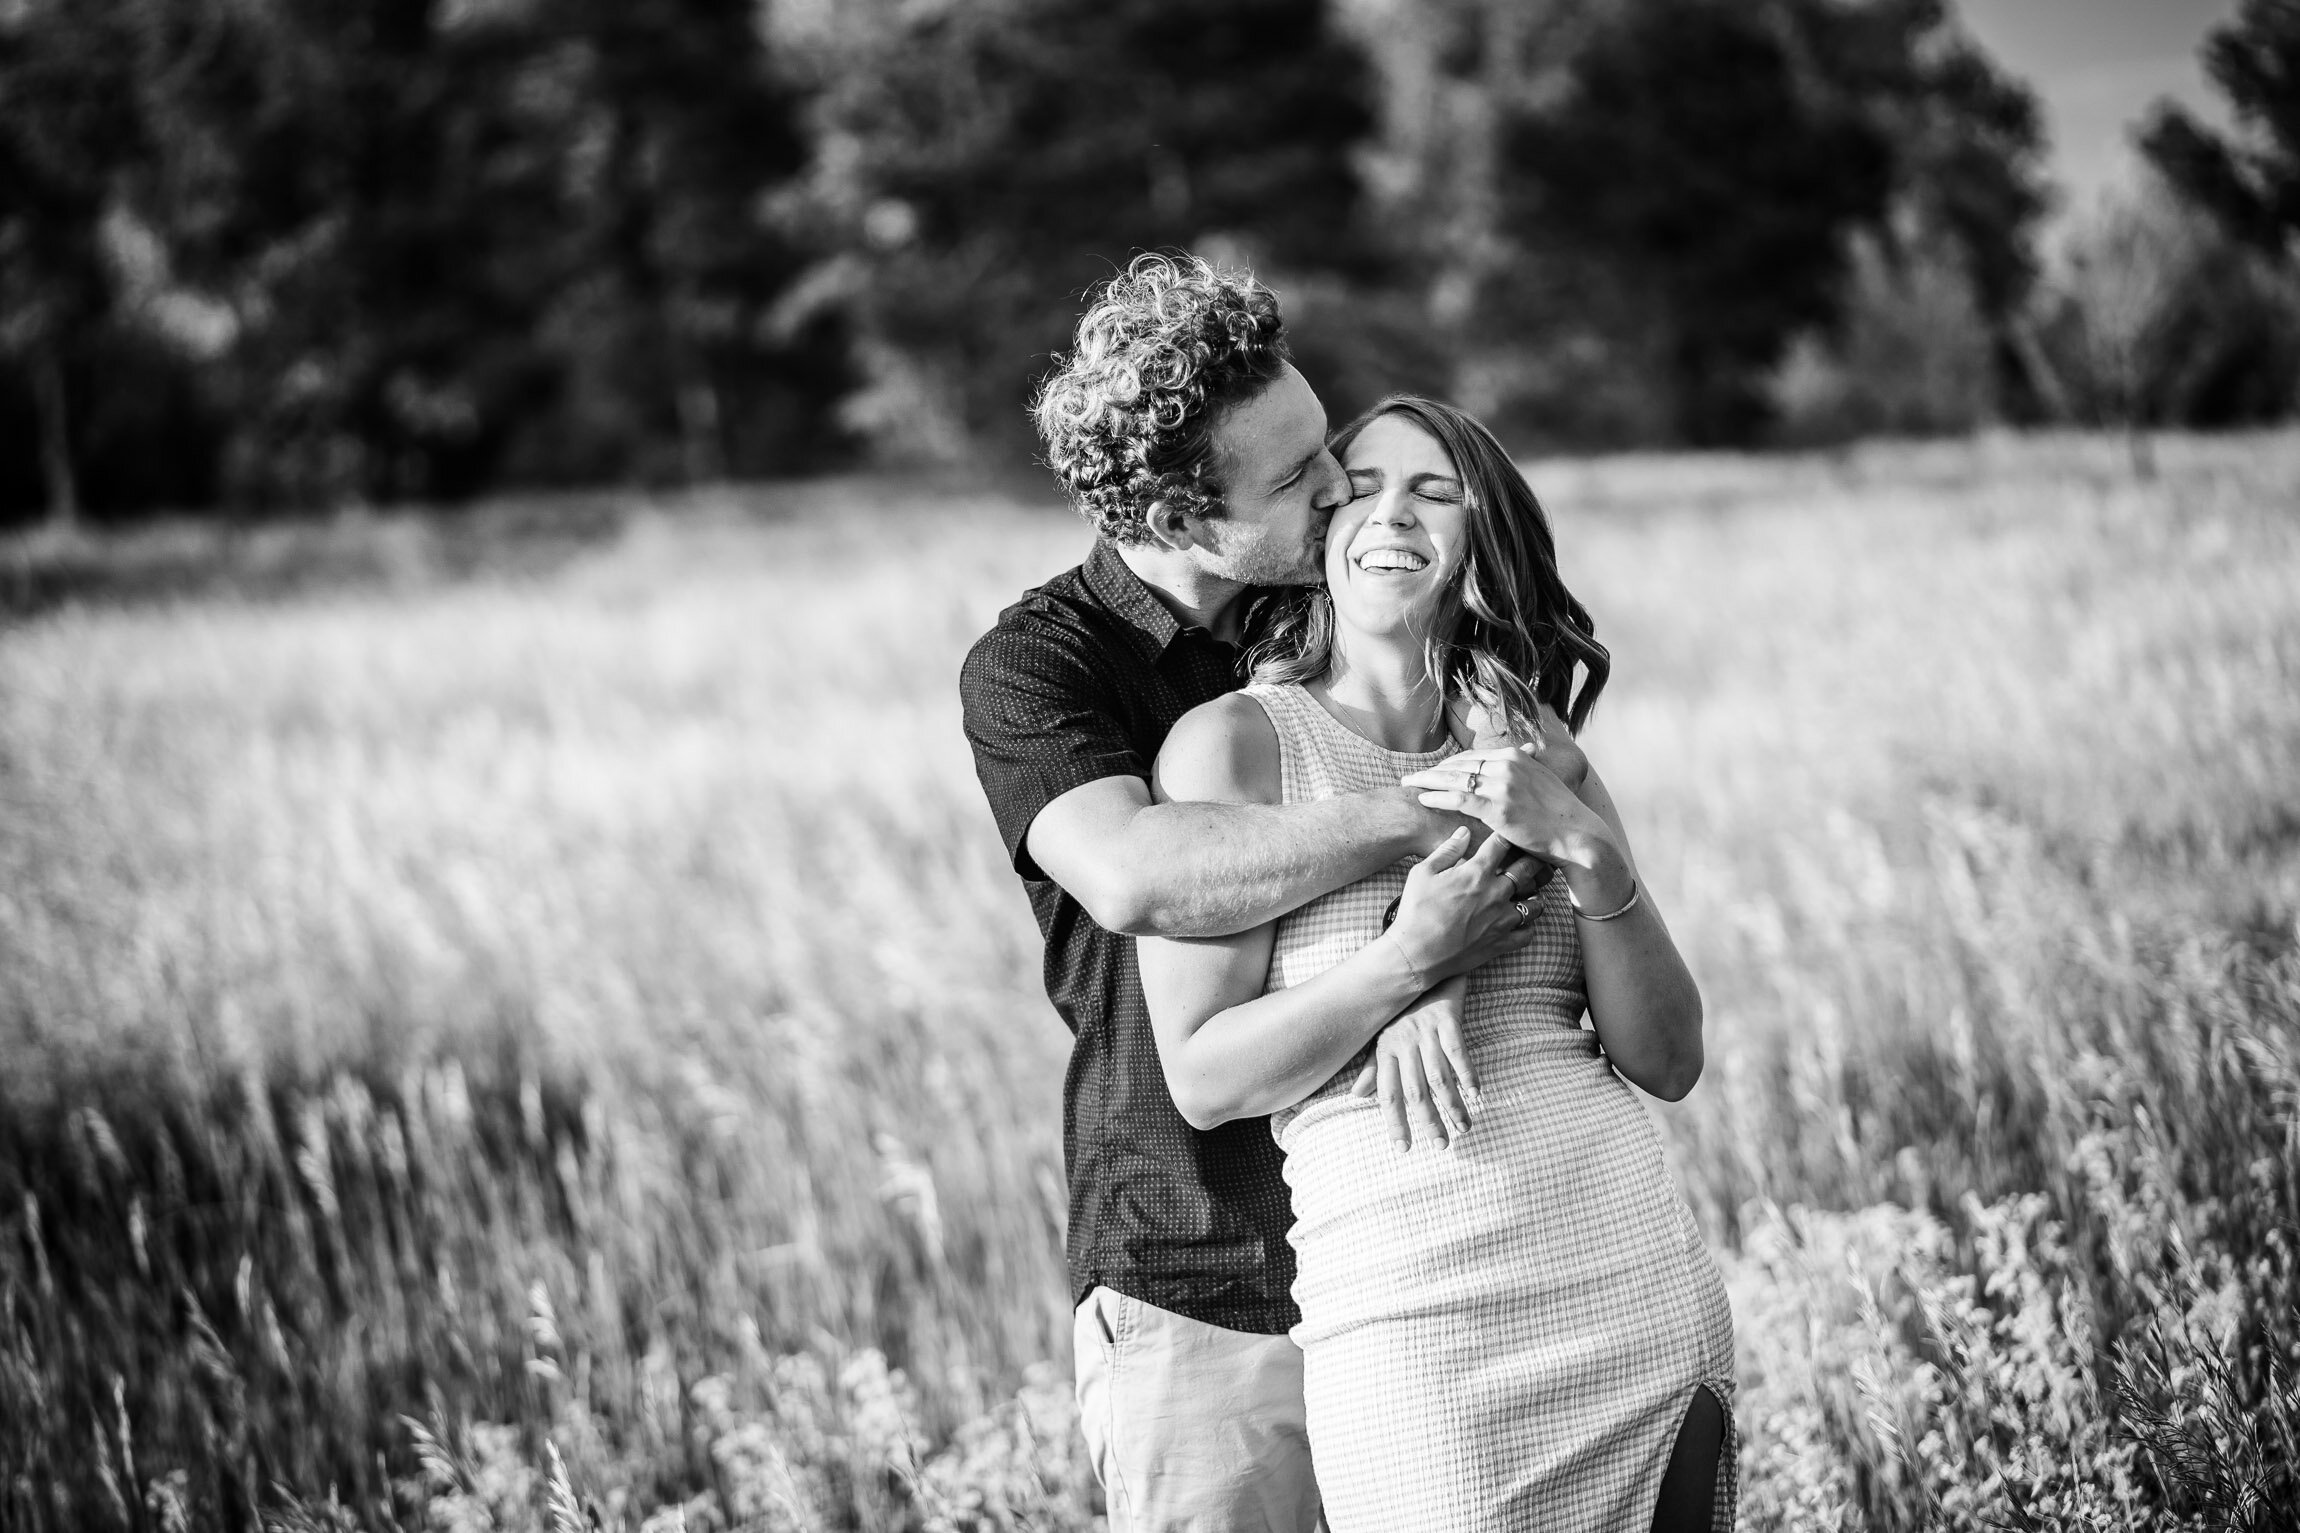 Engaged couple embraces for a portrait in tall windswept grass during golden hour, Engagement Session, Engagement Photos, Engagement Photos Inspiration, Engagement Photography, Engagement Photographer, Winter Engagement Photos, Mountain Engagement Photos, Denver engagement session, Denver engagement photos, Denver engagement photography, Denver engagement photographer, Denver engagement inspiration, Colorado engagement session, Colorado engagement photos, Colorado engagement photography, Colorado engagement photographer, Colorado engagement inspiration